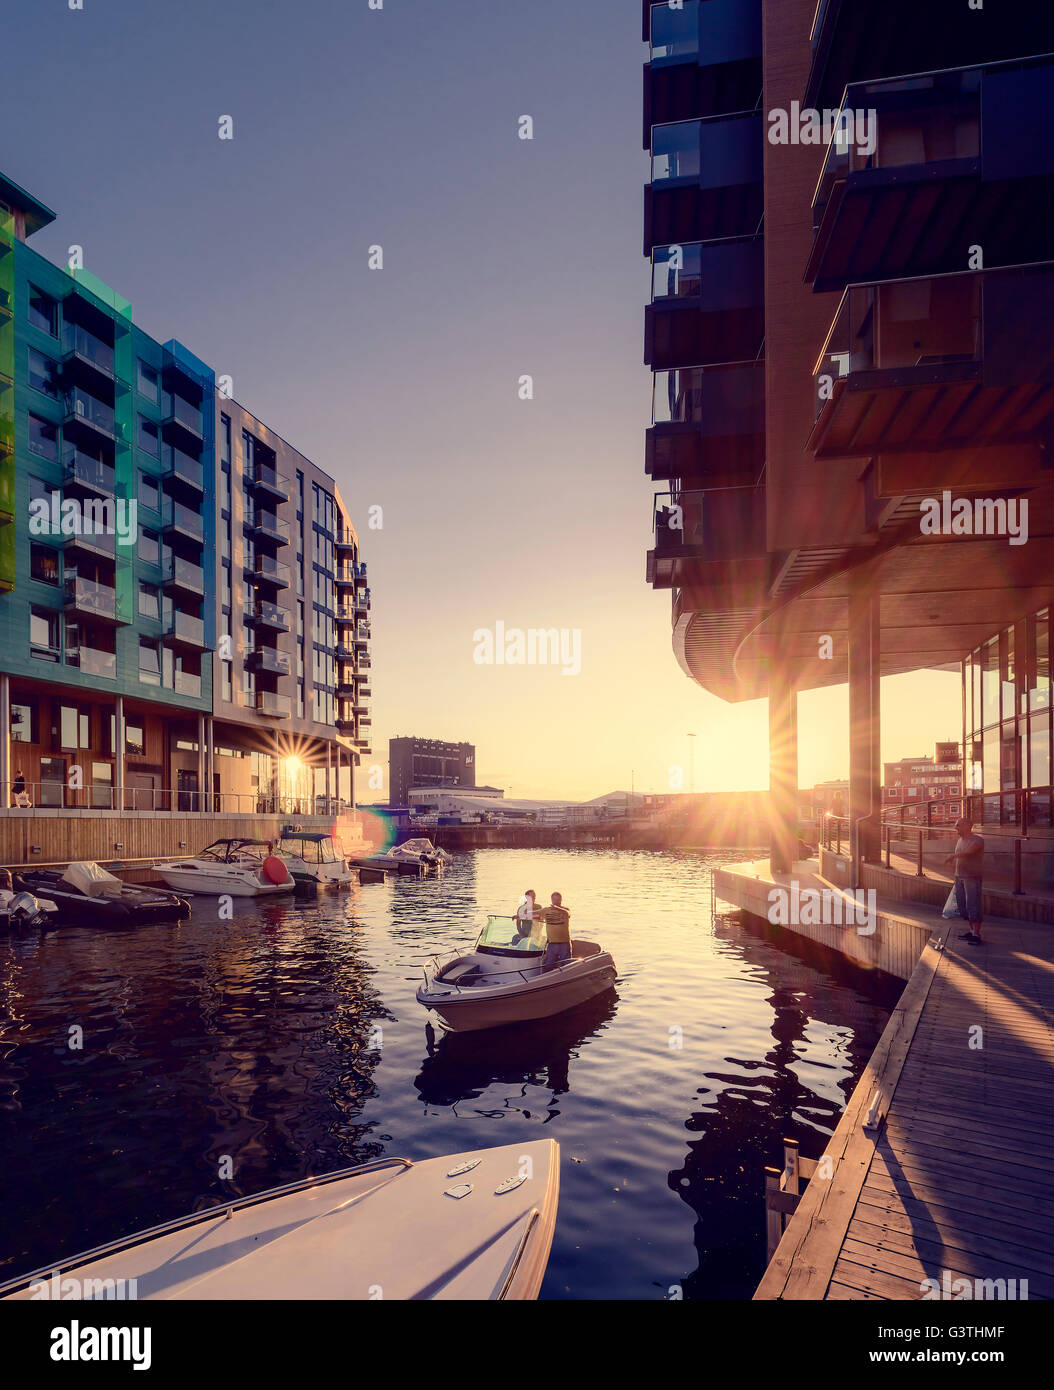 Norway, Oslo, Aker Brygge, Apartment buildings Stock Photo